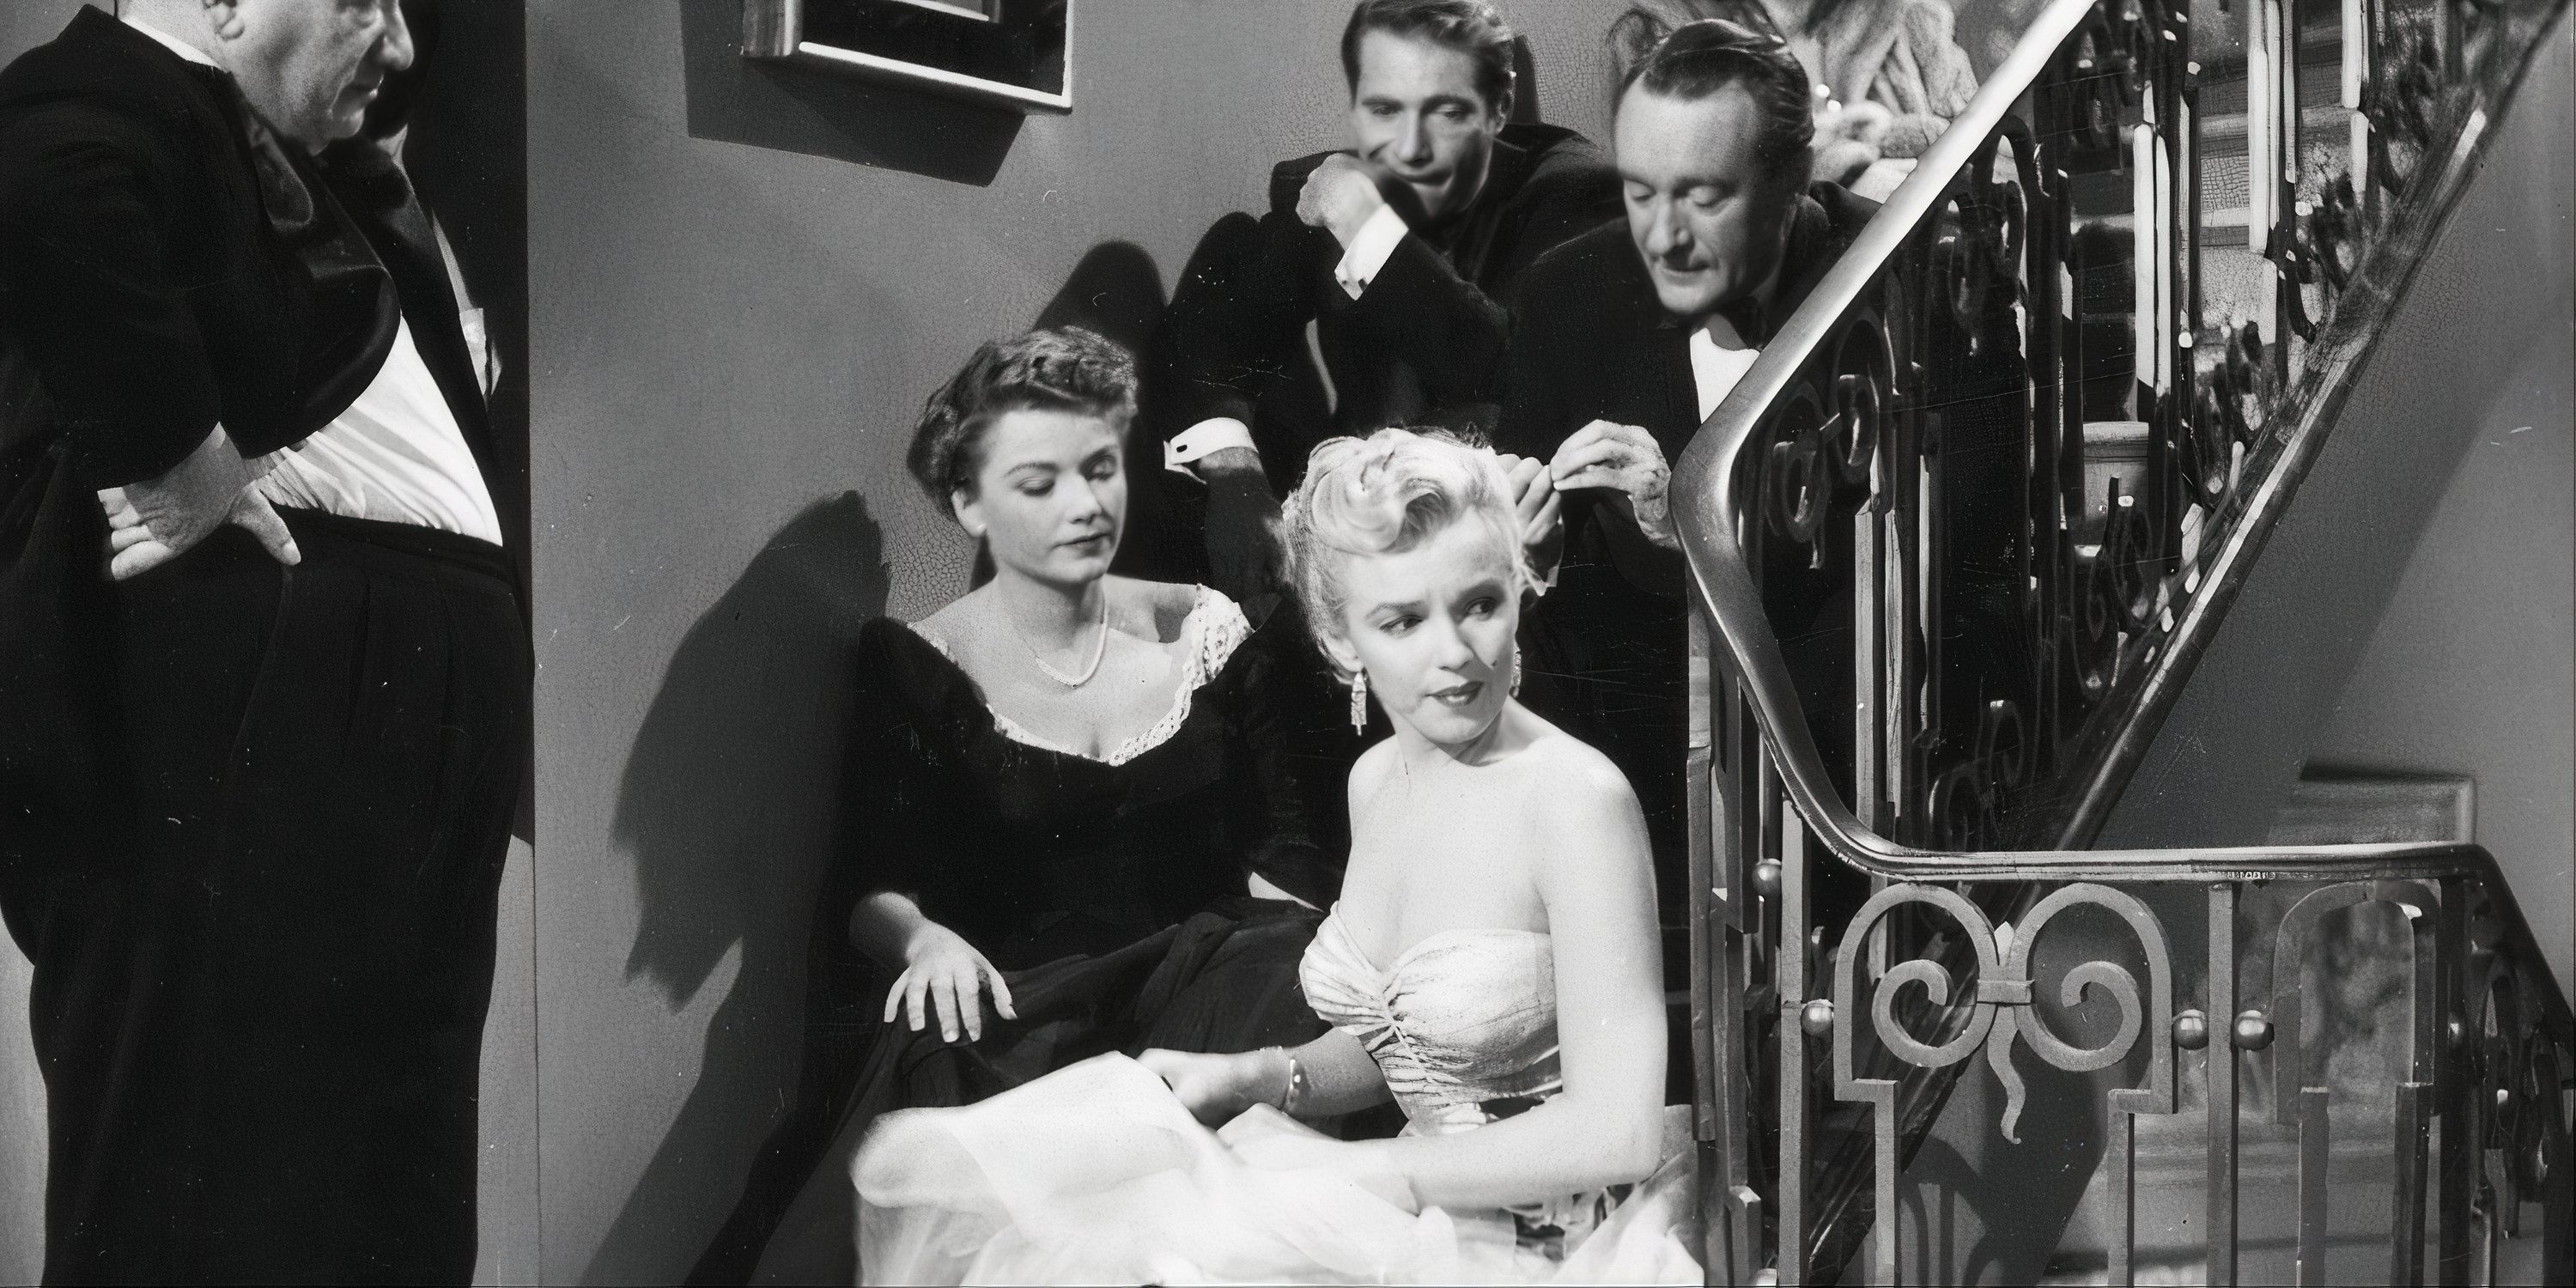 Marilyn Monroe as Miss Casswell sitting on the stairs looking worried with several people behind her also sitting in All About Eve